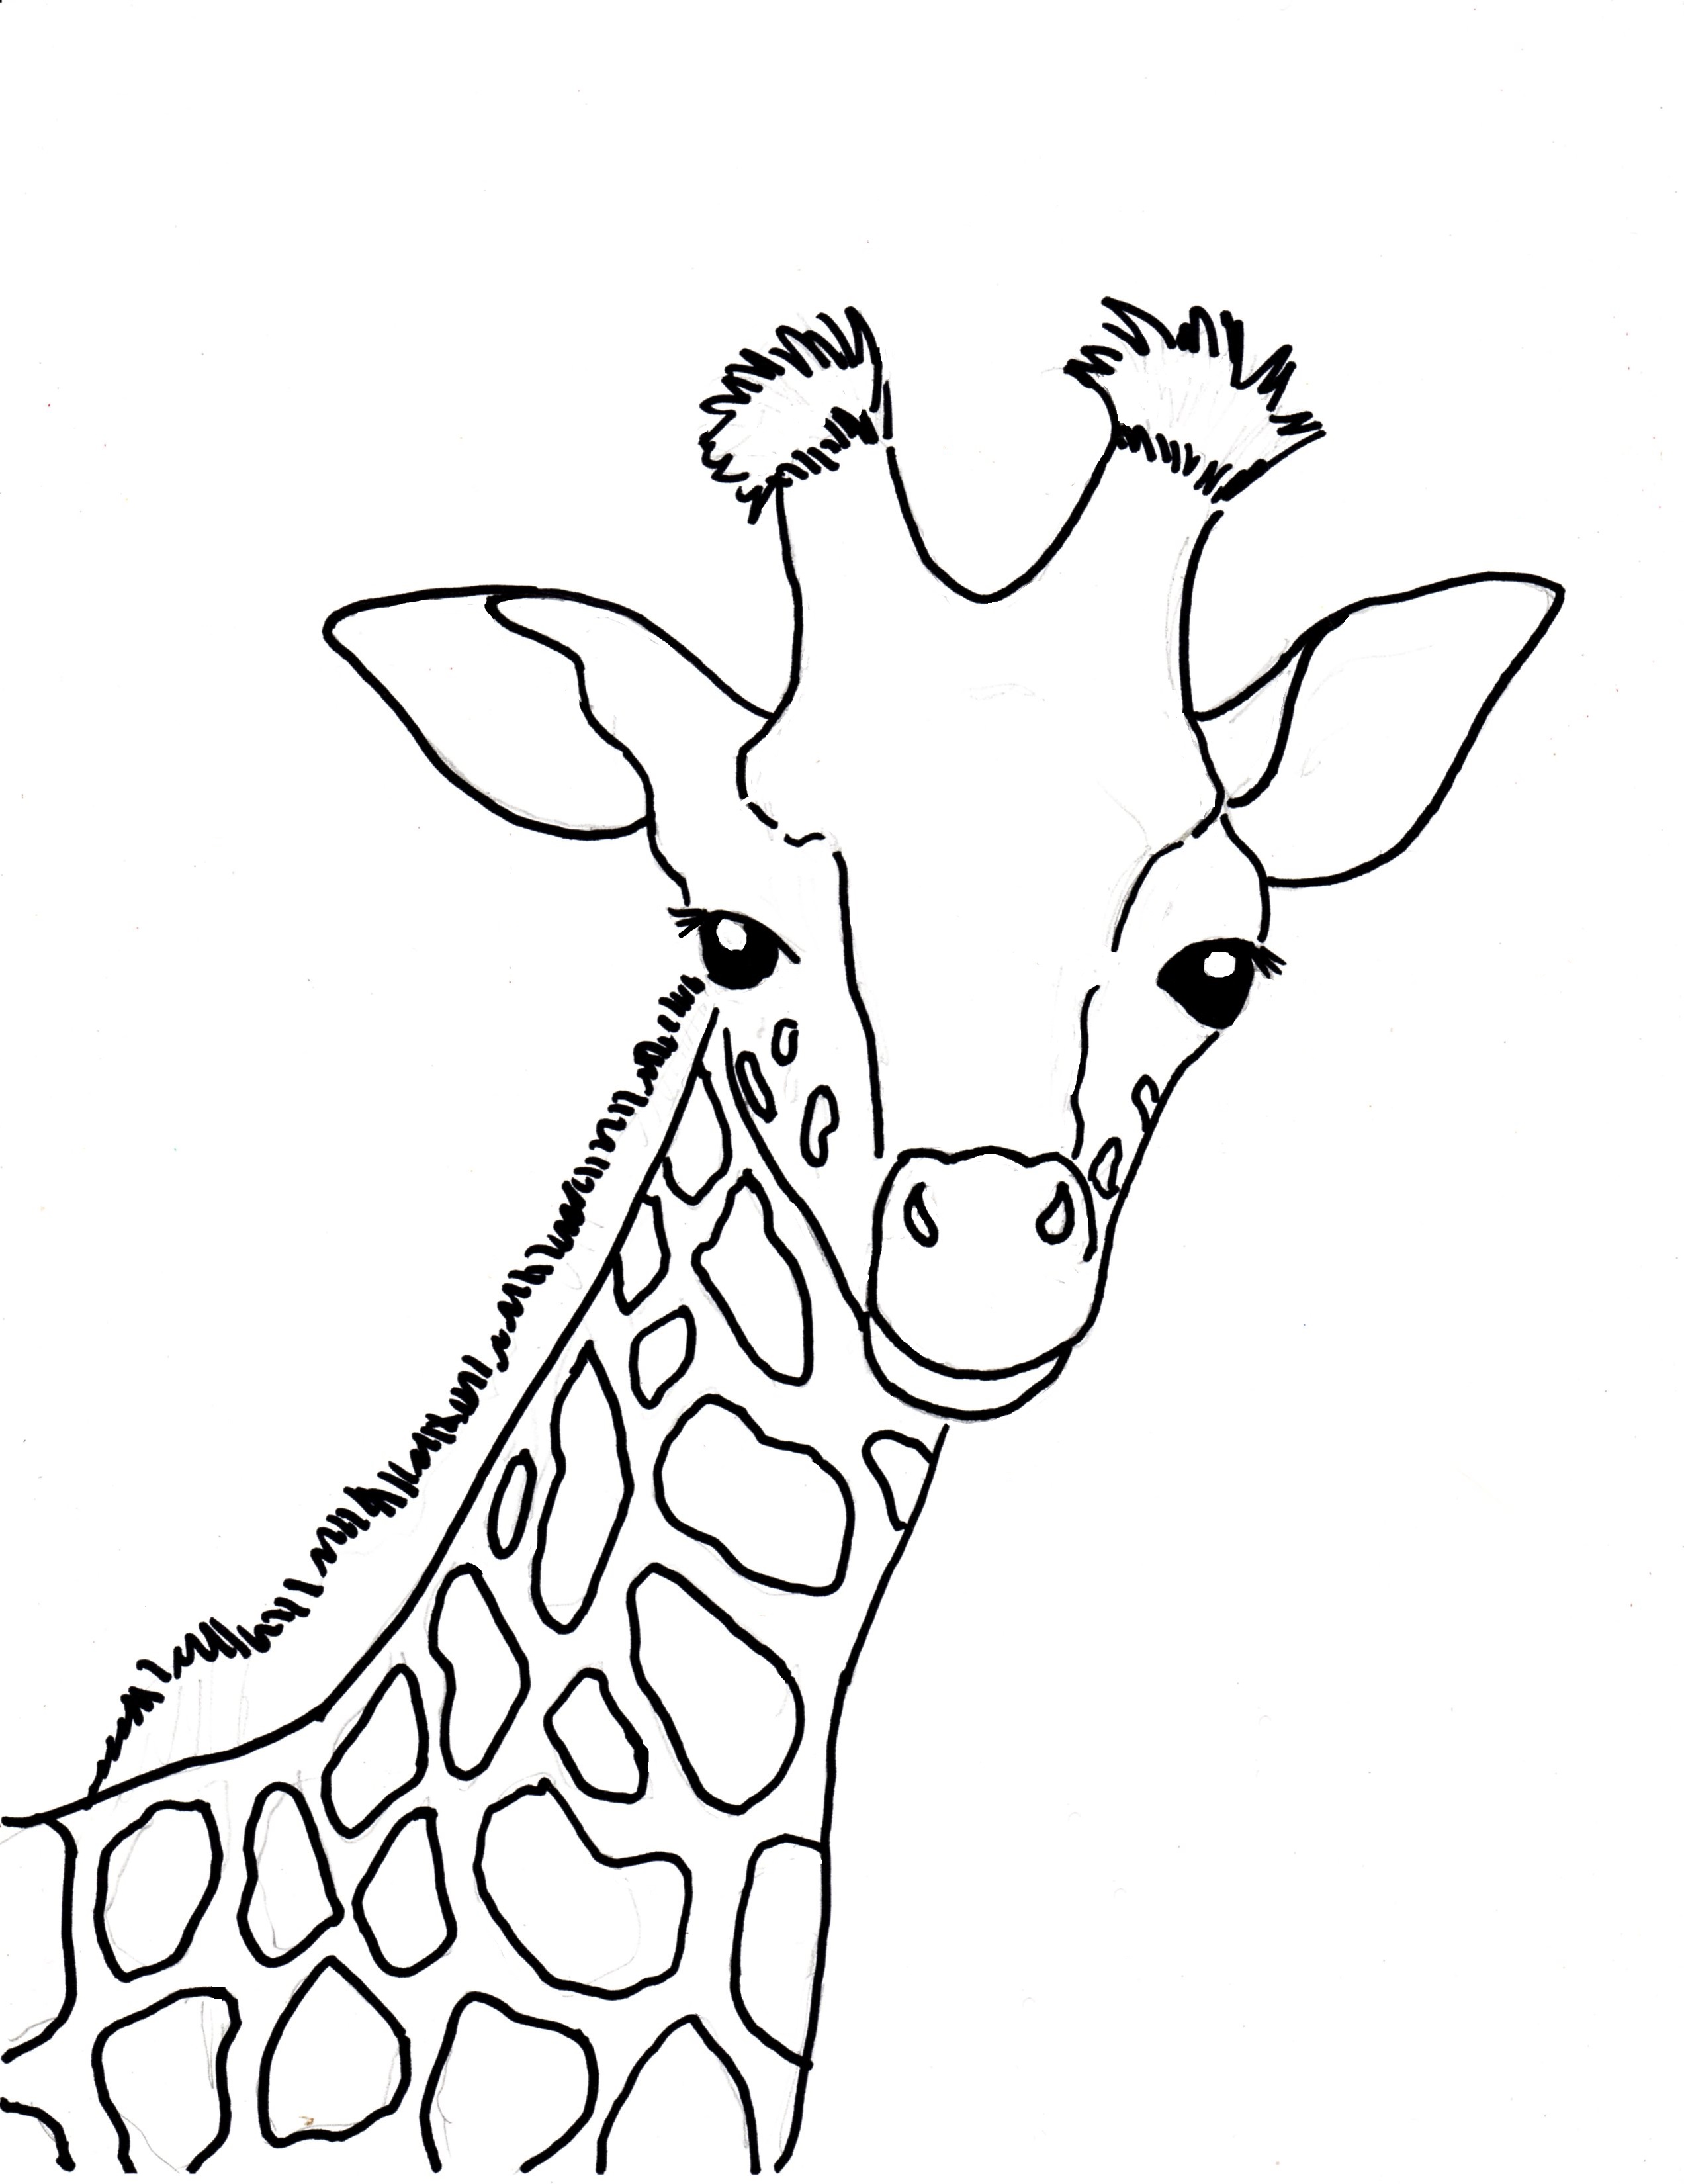 Download Baby Giraffe Coloring Page - Art Starts